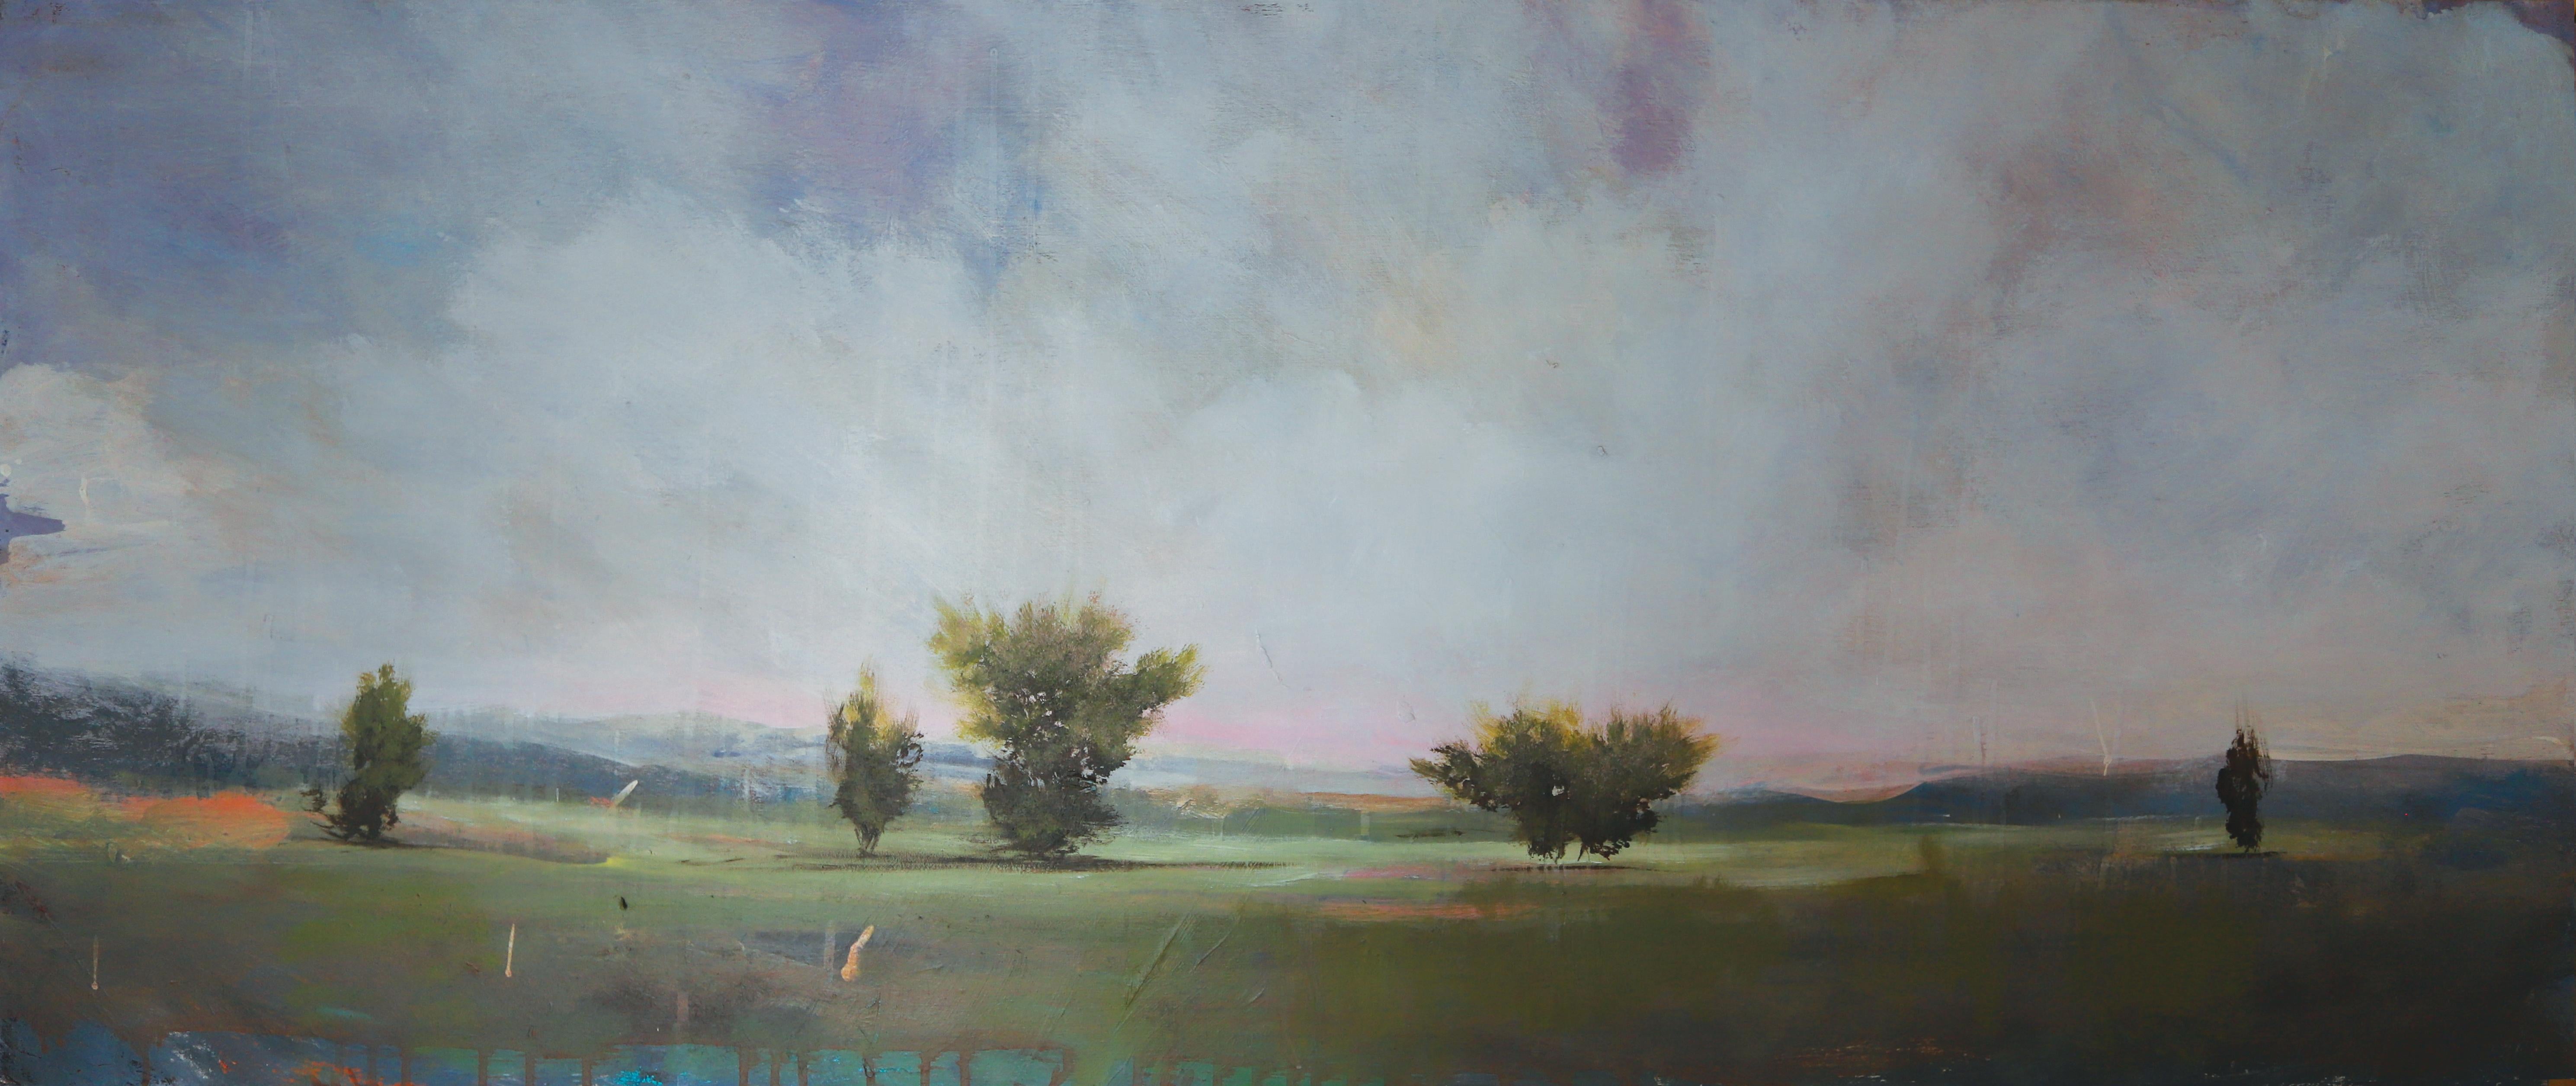 Peter Hoffer
East River Plains, 2019
20 x 48 in.
acrylic, oil, and resin on panel
(hoff181)

This original landscape painting on panel by Peter Hoffer is simultaneously contemporary and traditional, with a glistening surface of thick resin over